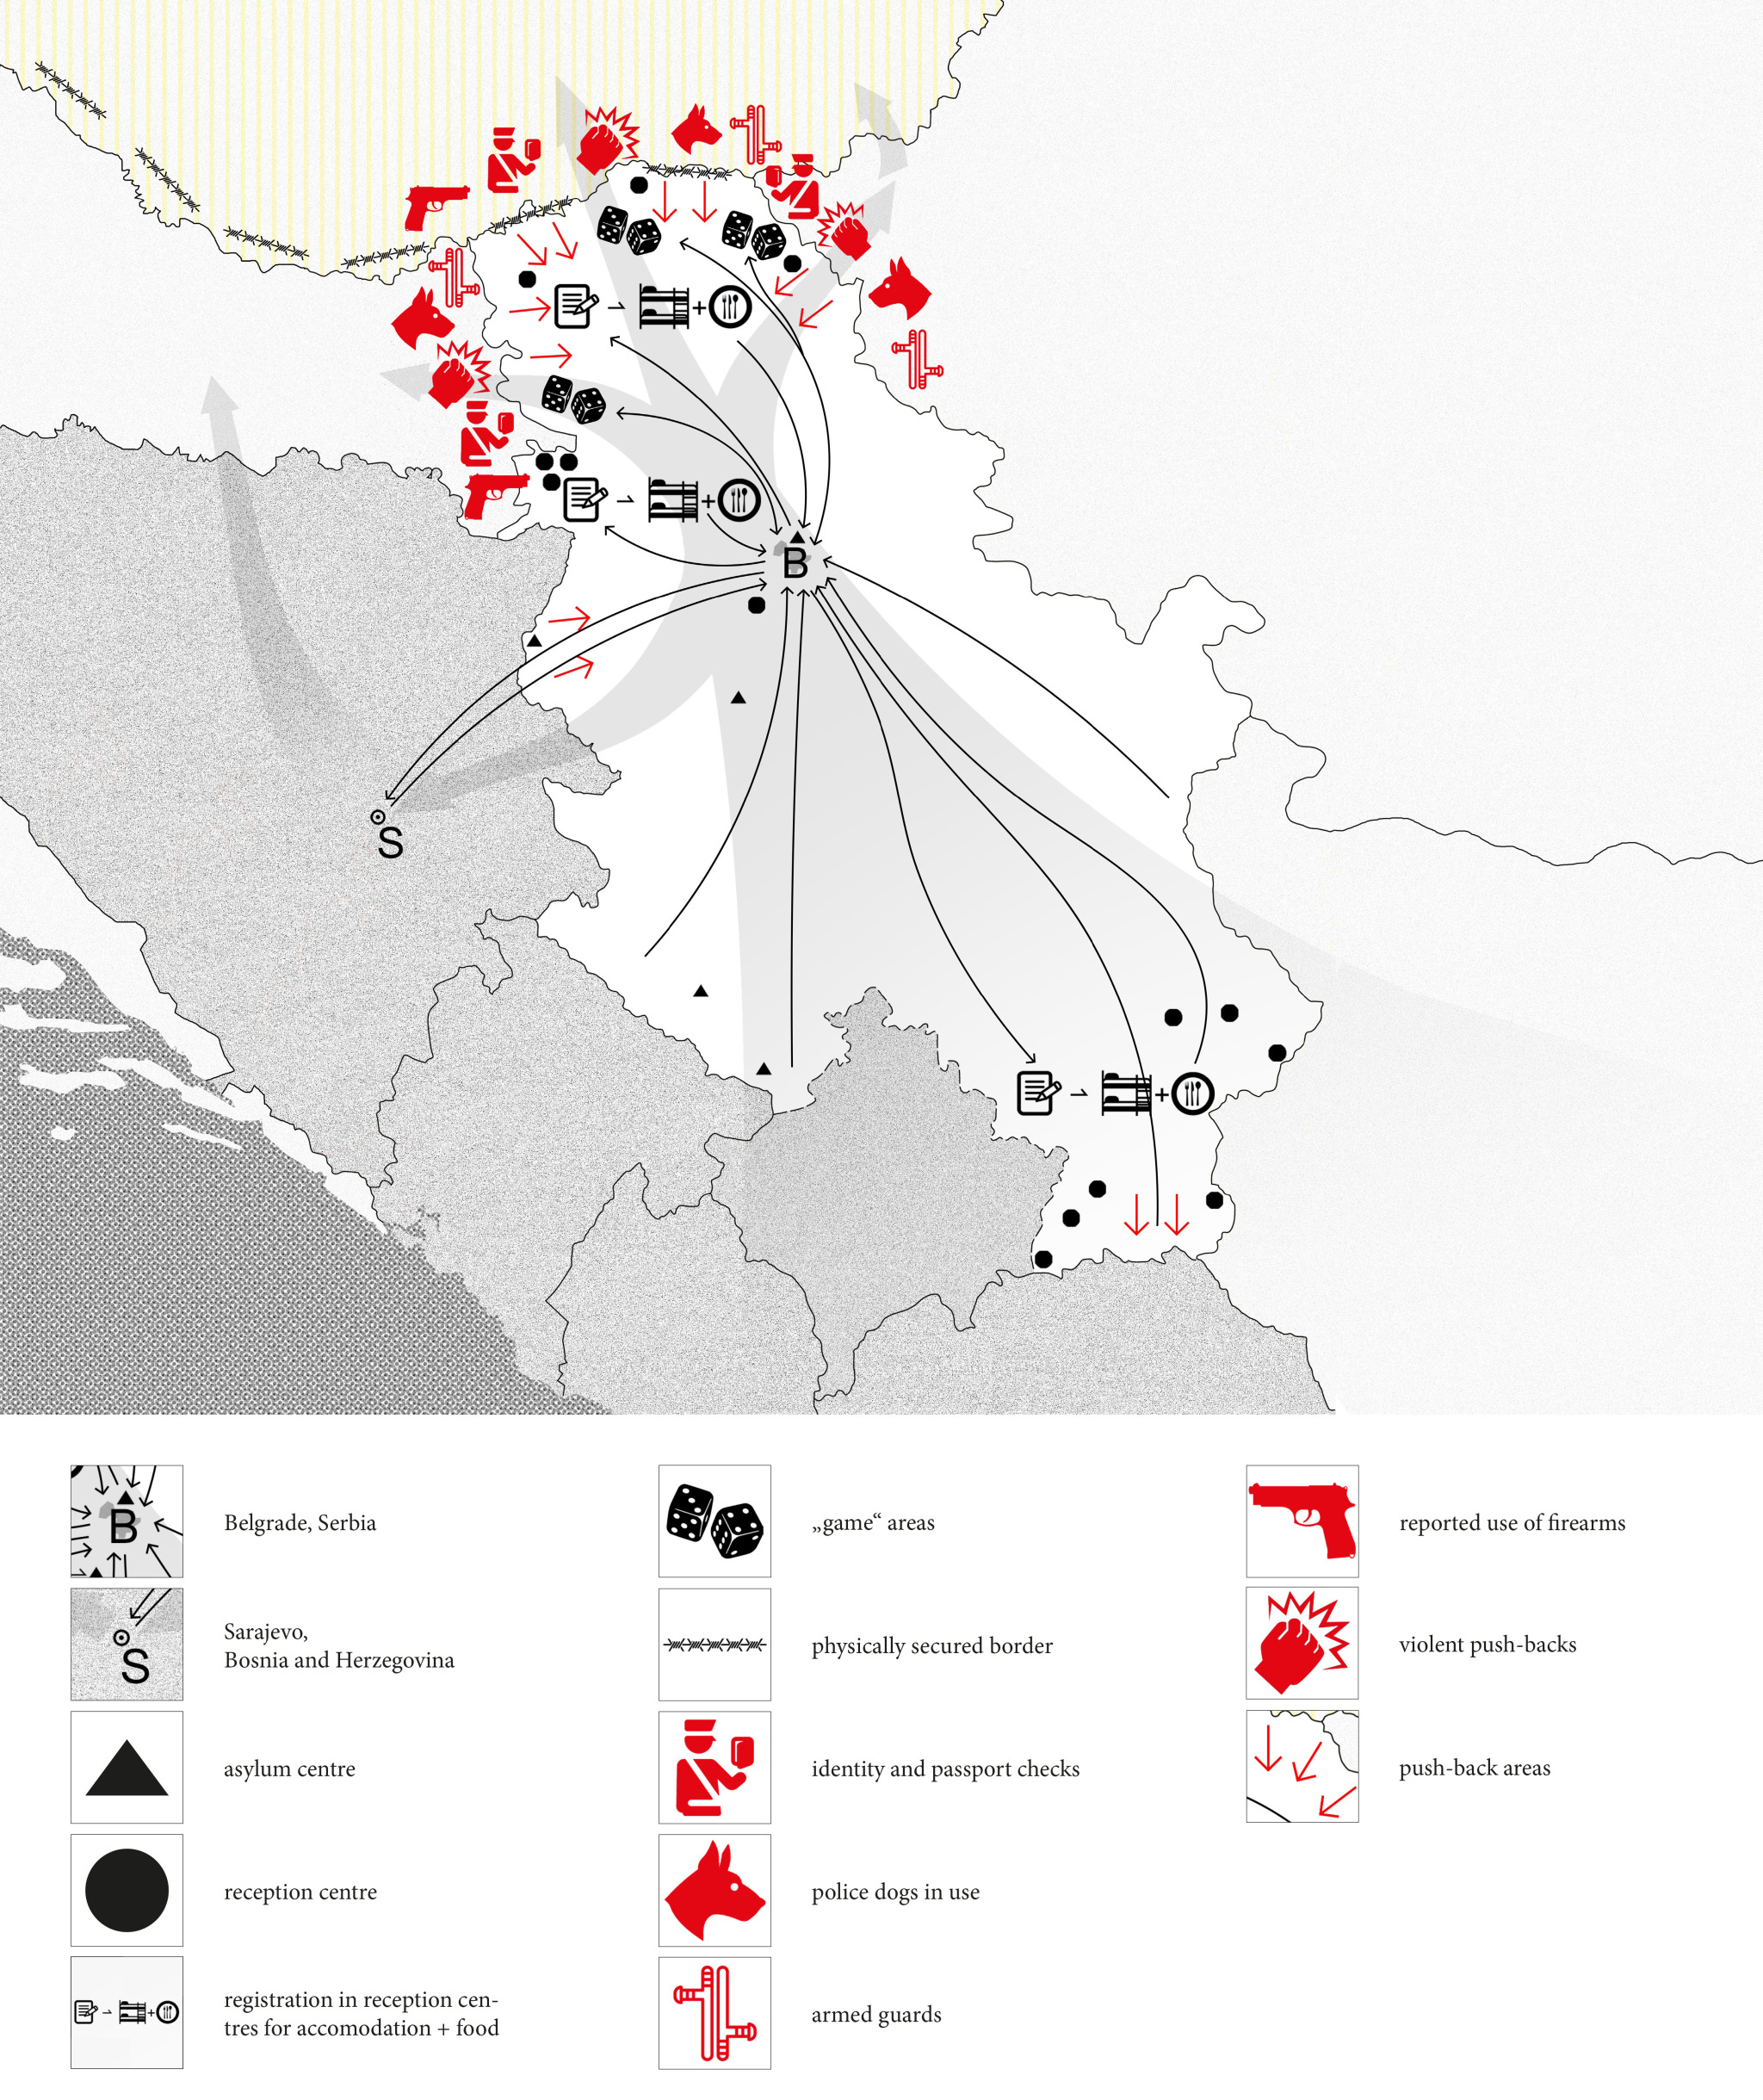 Map 3: Serbia—The Refugee District in the context of Serbian migration management: between regulating and tolerating. The map shows the status at the end of September 2019. This map focuses on the inner-Serbian pendulum migration between Belgrade, the reception centres, and the borders. In reaction to the recent changes of migration in the Balkans, migration flows to Sarajevo and Bosnia and Herzegovina towards the Bosnian-Croatian border were added. After failed attempts to cross the border due to push-backs, many refugees return to Belgrade and Serbia in favour of better formal and informal support infrastructures.